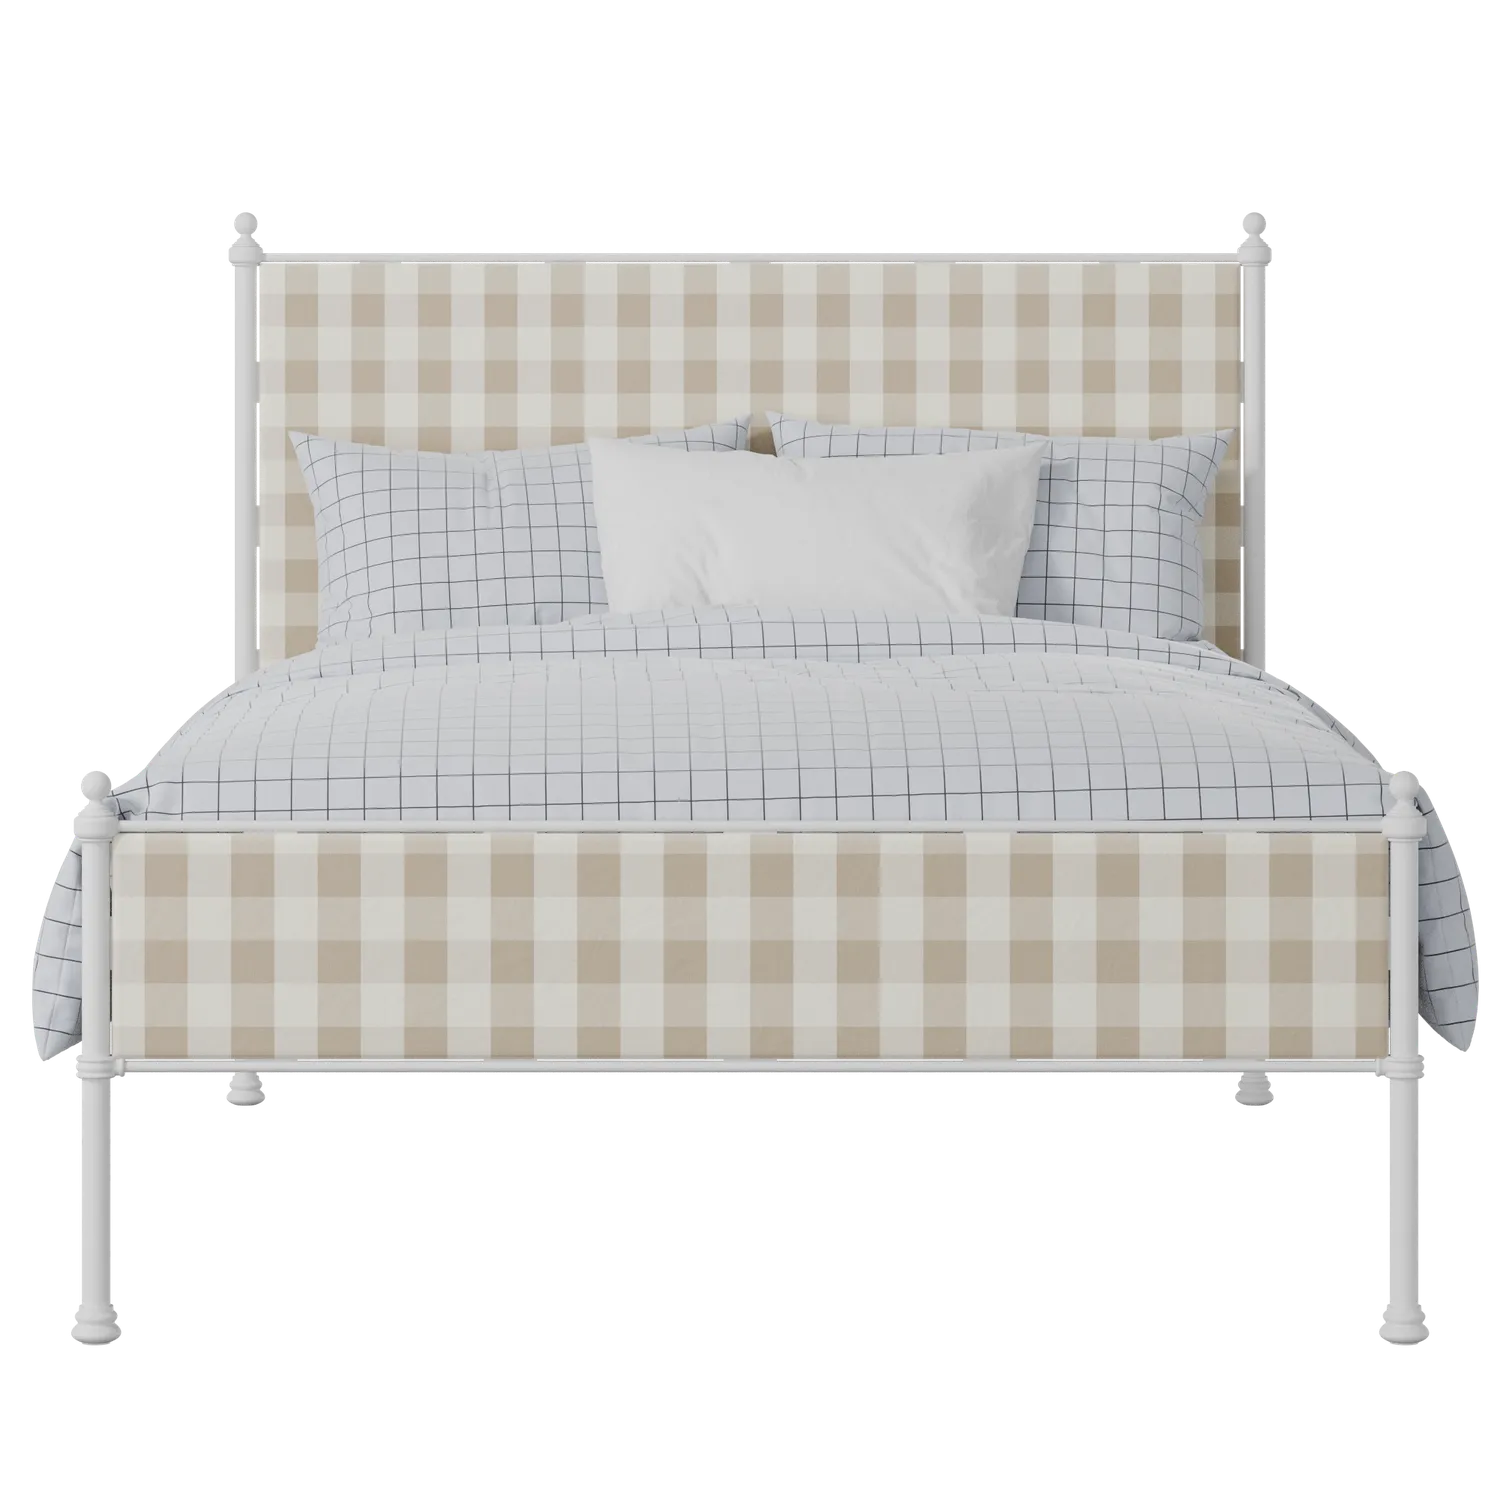 Neville Slim iron/metal upholstered bed in white with grey fabric